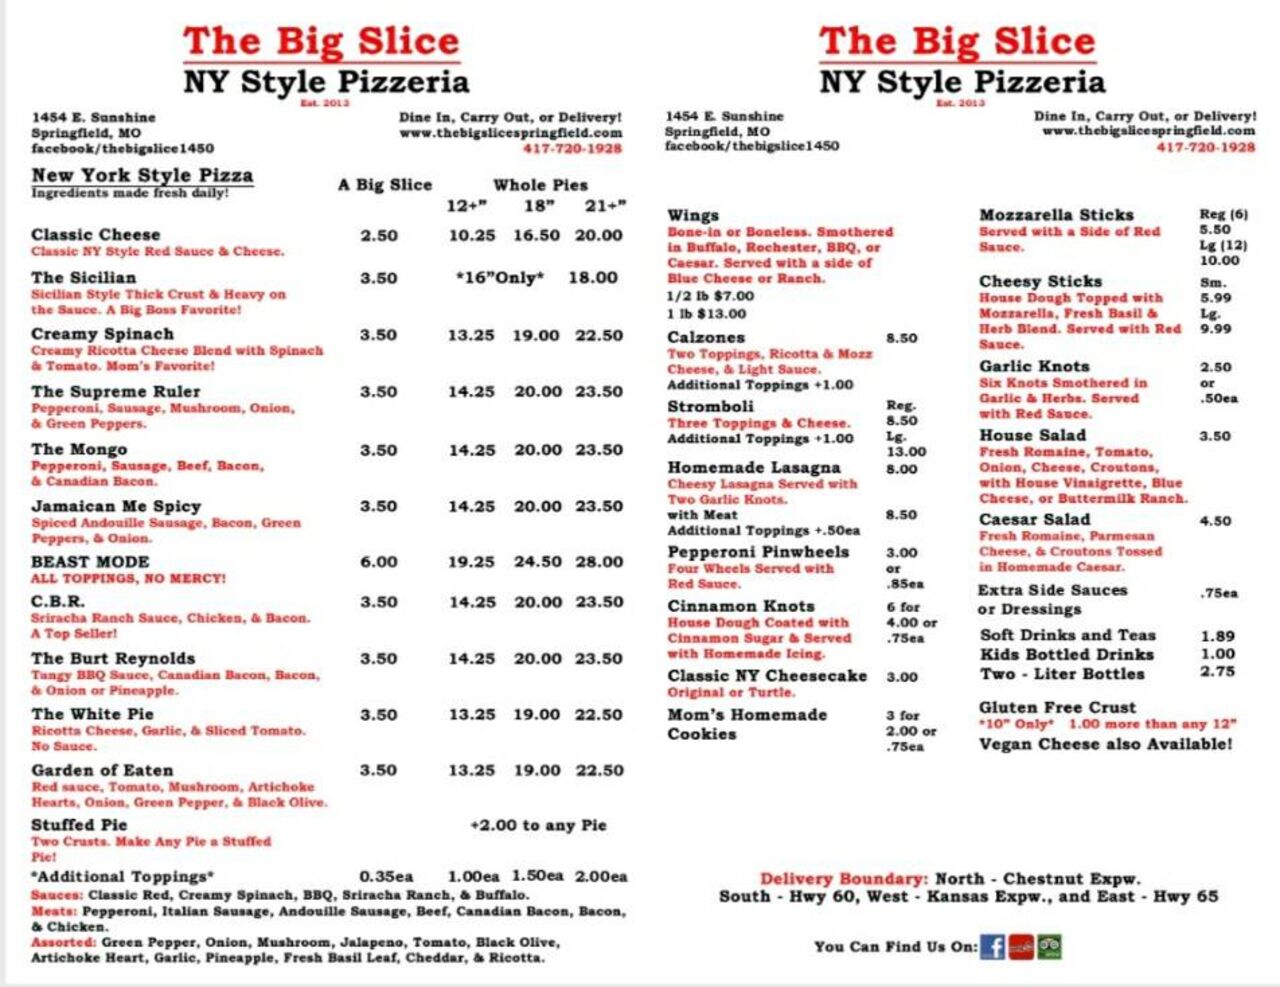 A photo of The Big Slice